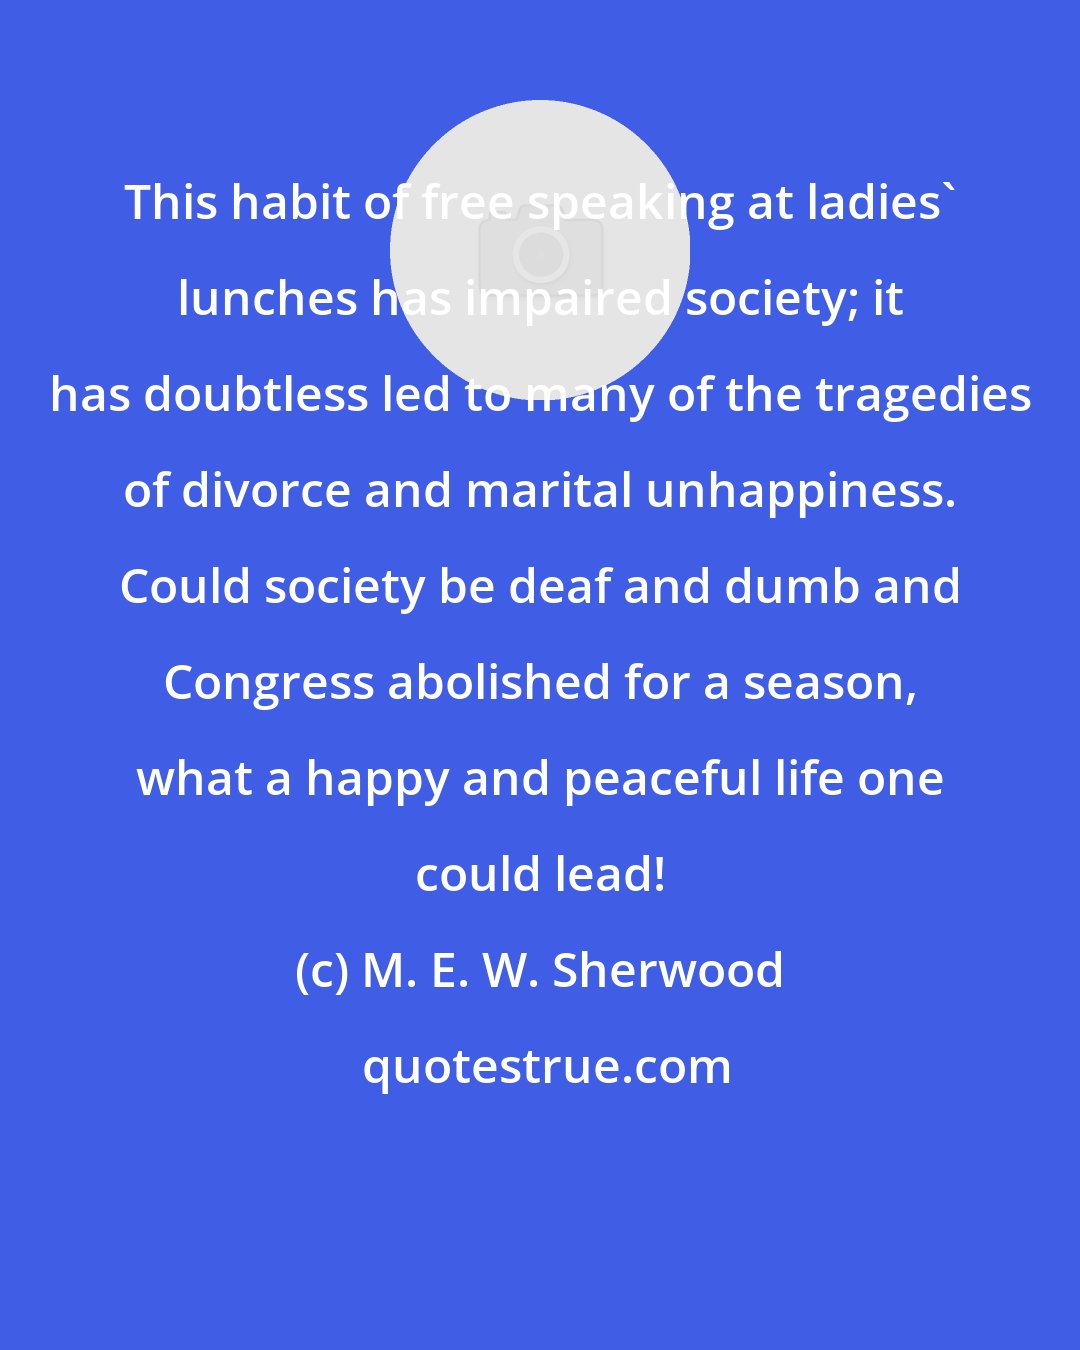 M. E. W. Sherwood: This habit of free speaking at ladies' lunches has impaired society; it has doubtless led to many of the tragedies of divorce and marital unhappiness. Could society be deaf and dumb and Congress abolished for a season, what a happy and peaceful life one could lead!